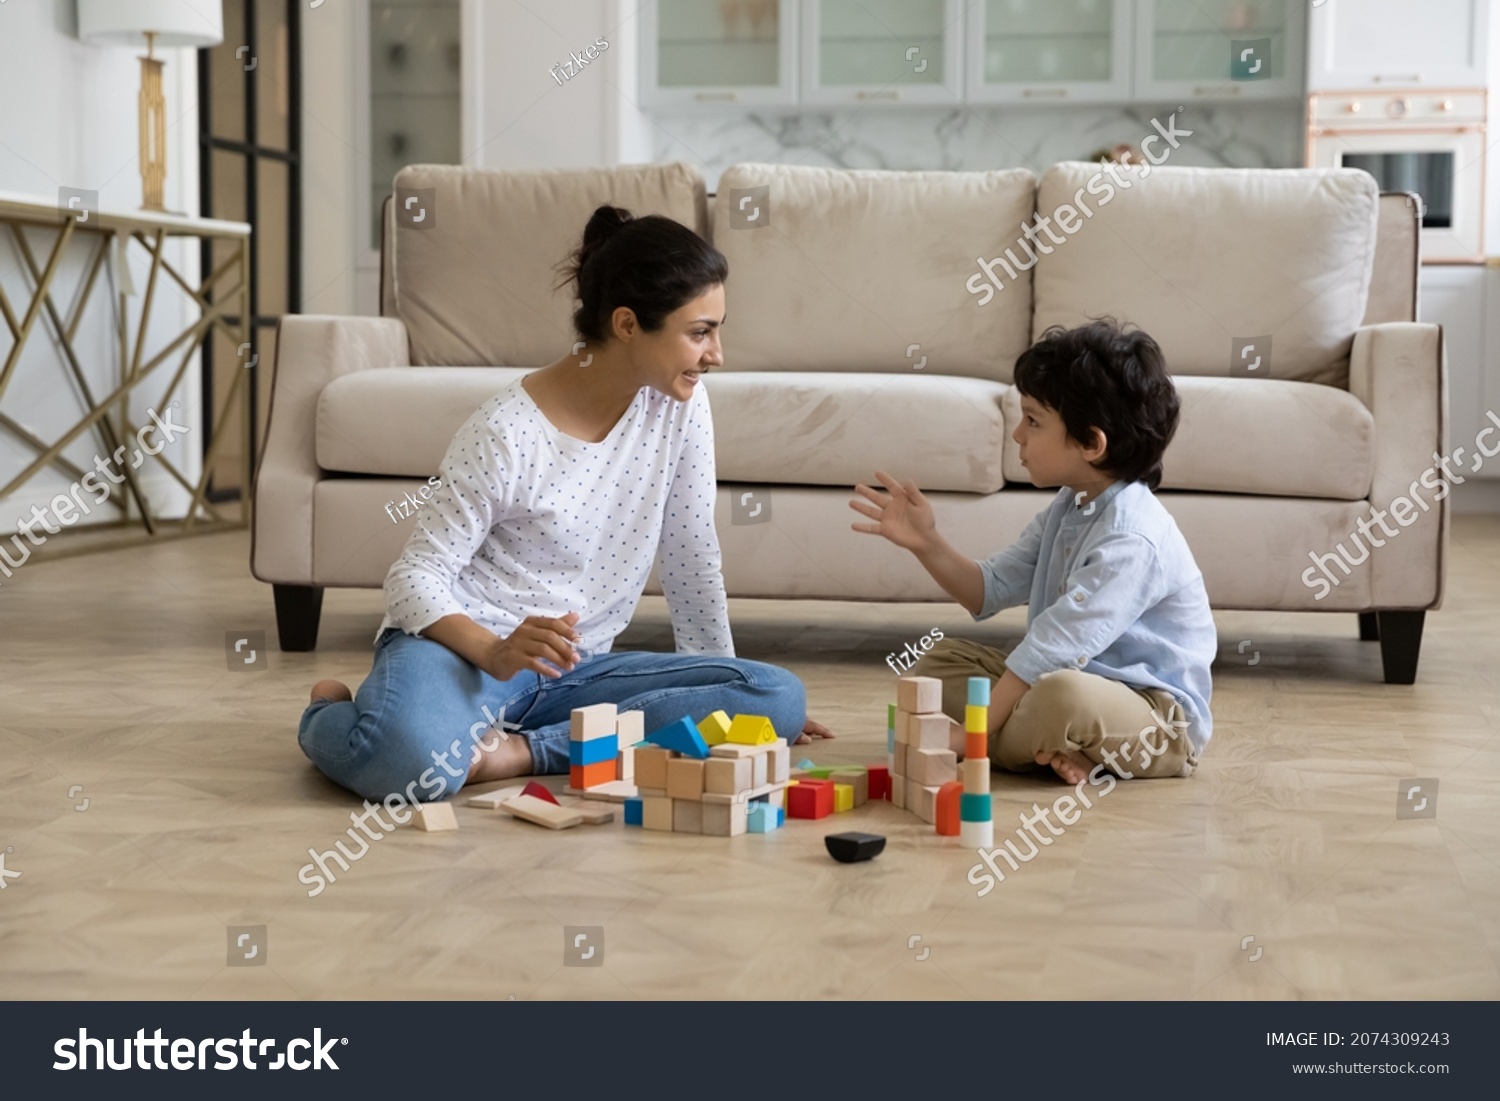 Loving young Indian mother and little son playing together on heating floor, building towers from toy construction bricks, talking, enjoying leisure, playtime, creative game. Motherhood concept #2074309243